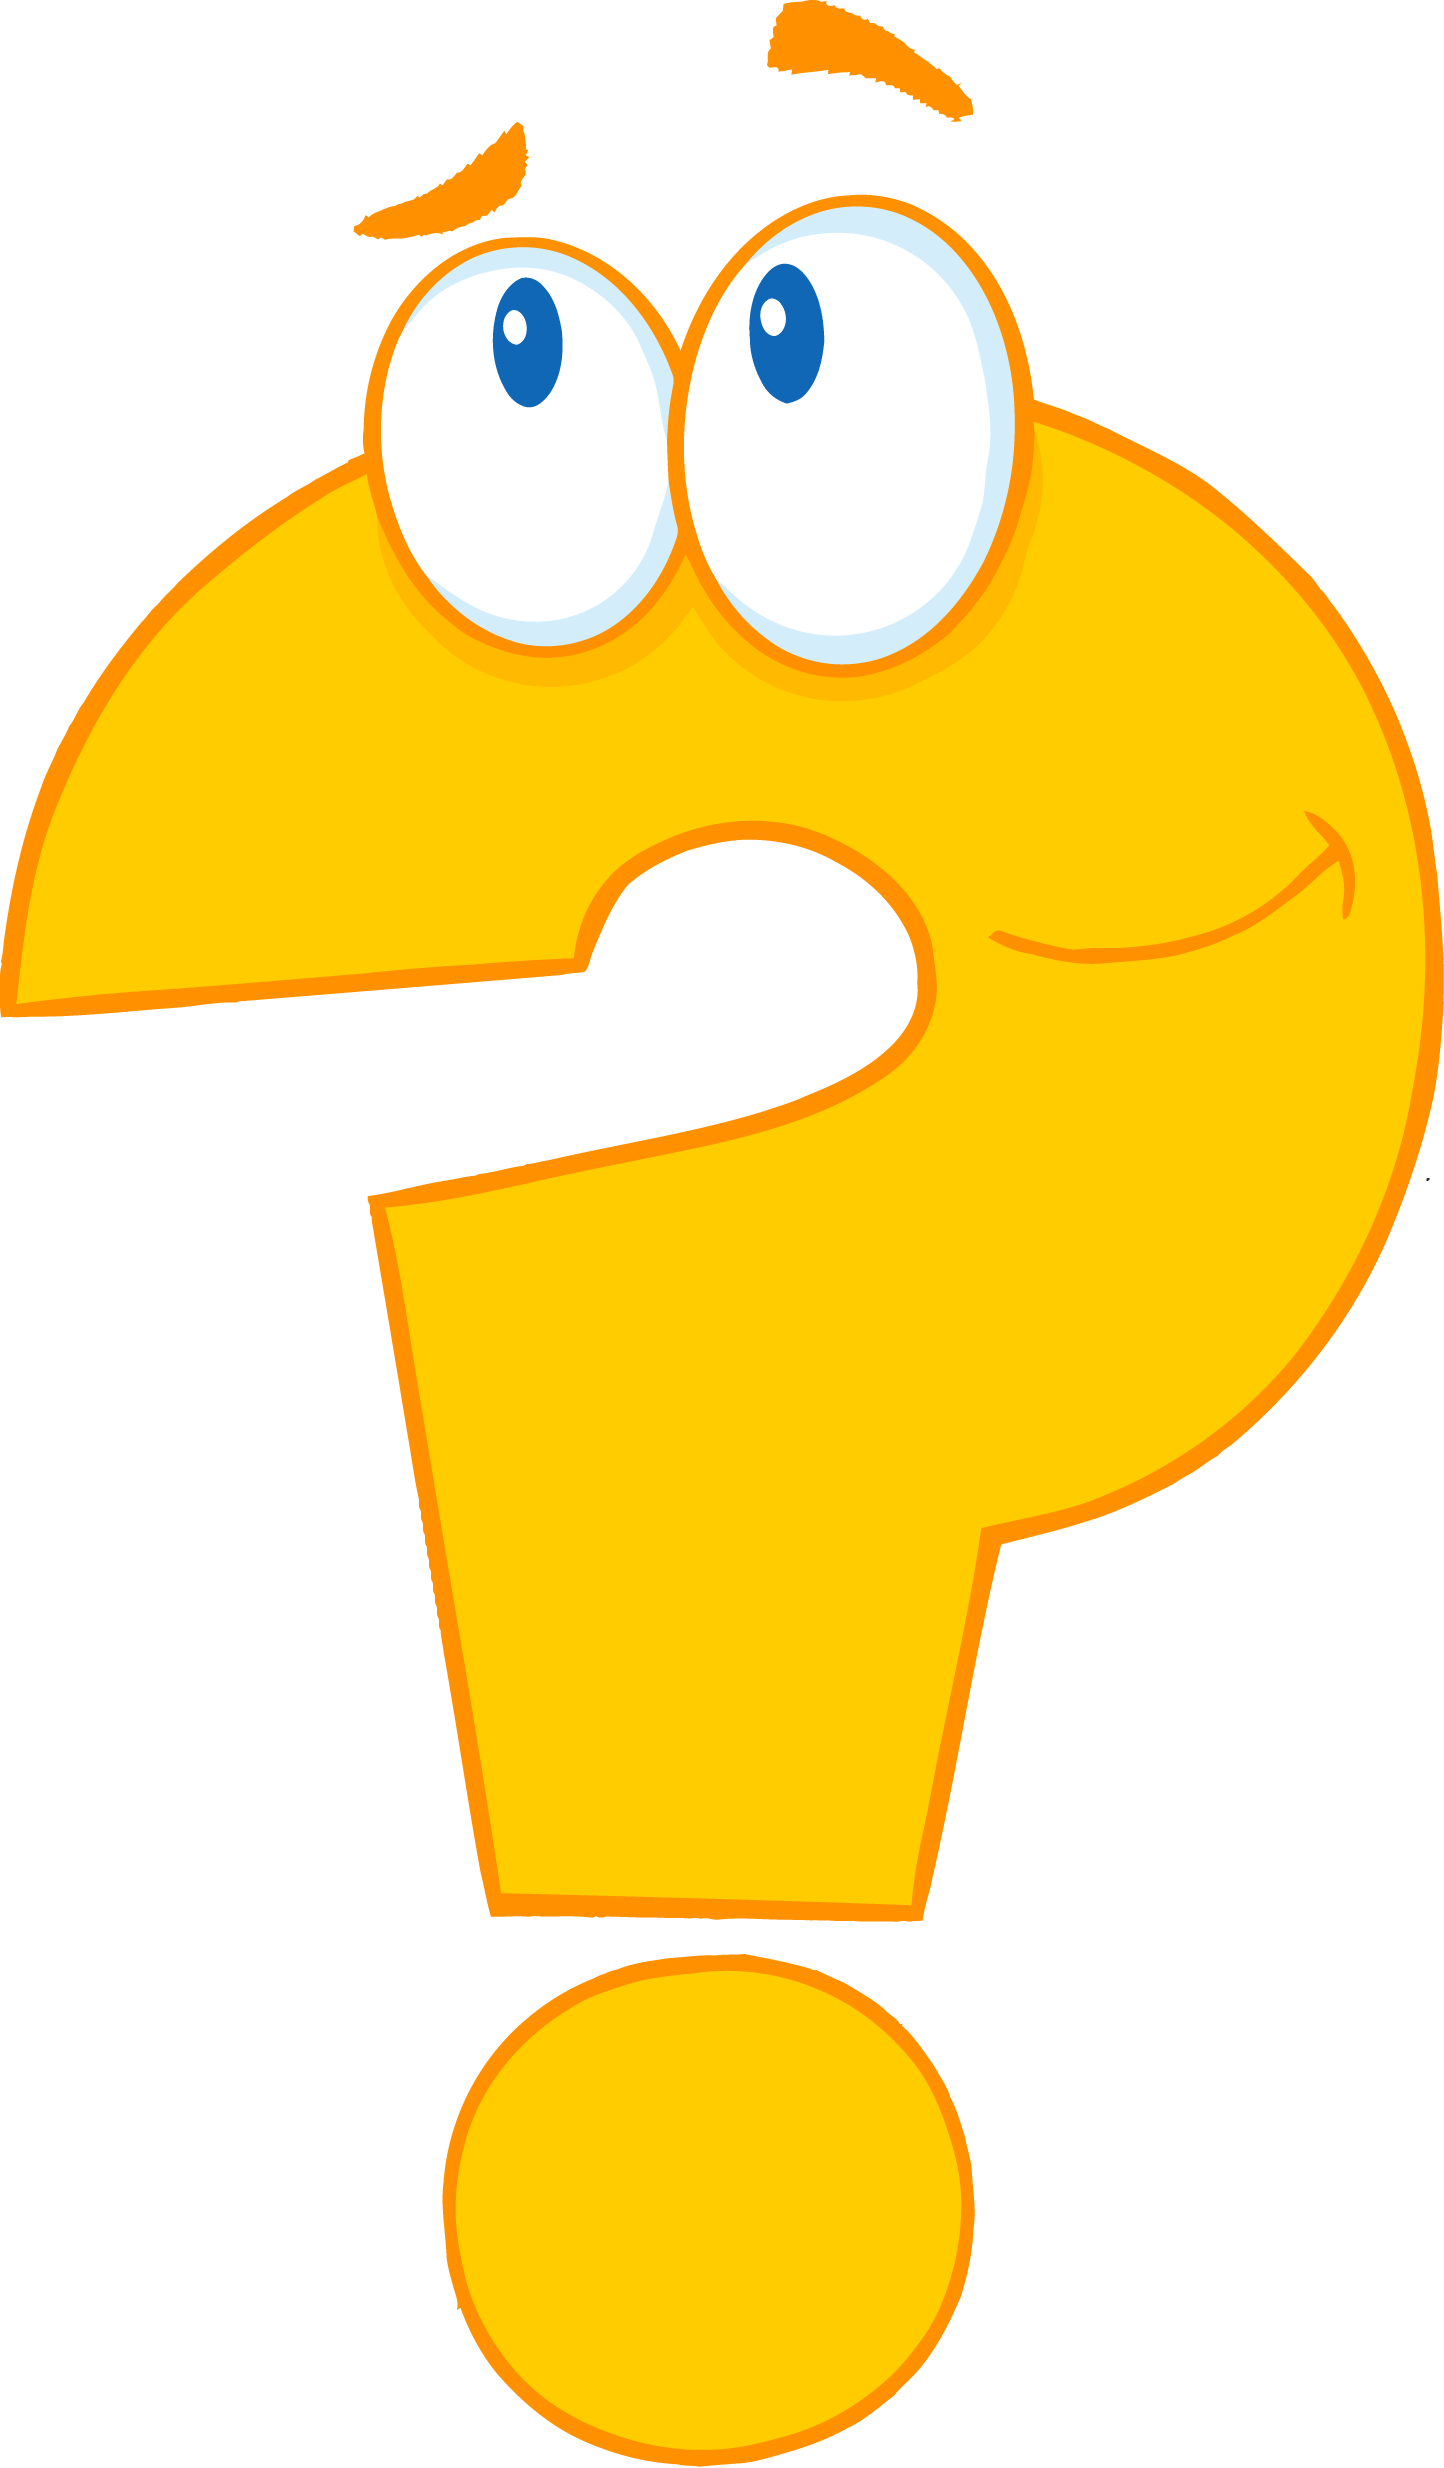 Question Mark clipart #9, Download drawings